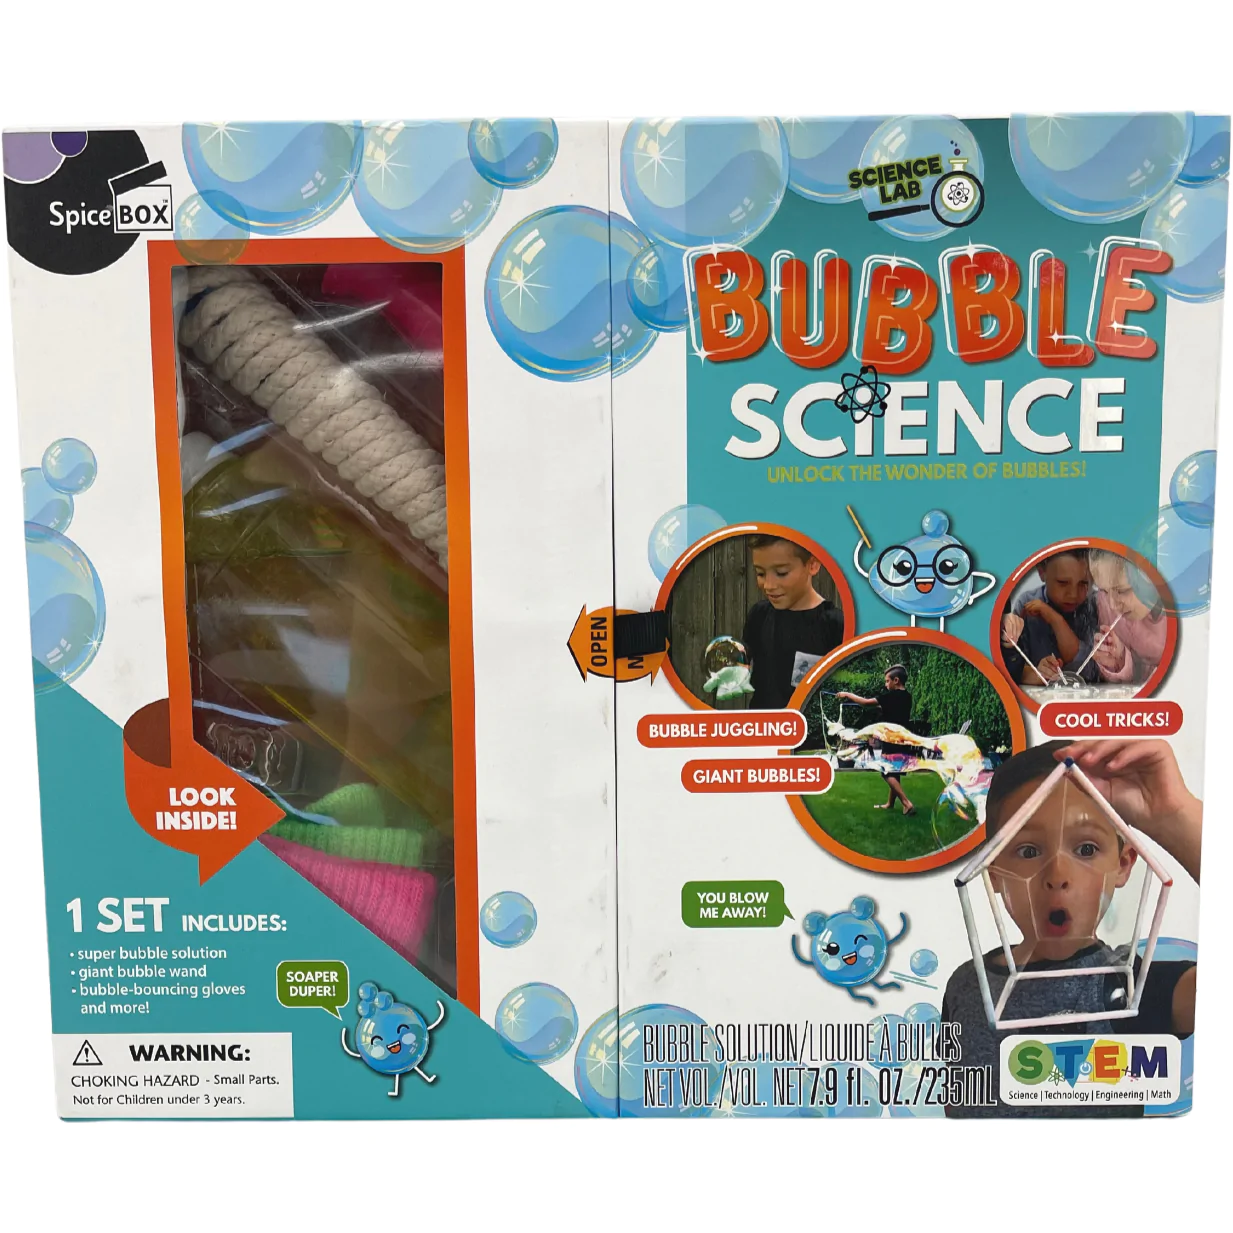 Spice Box Bubble Science Kit / STEM Toy / Science Experiments at Home **DEALS**